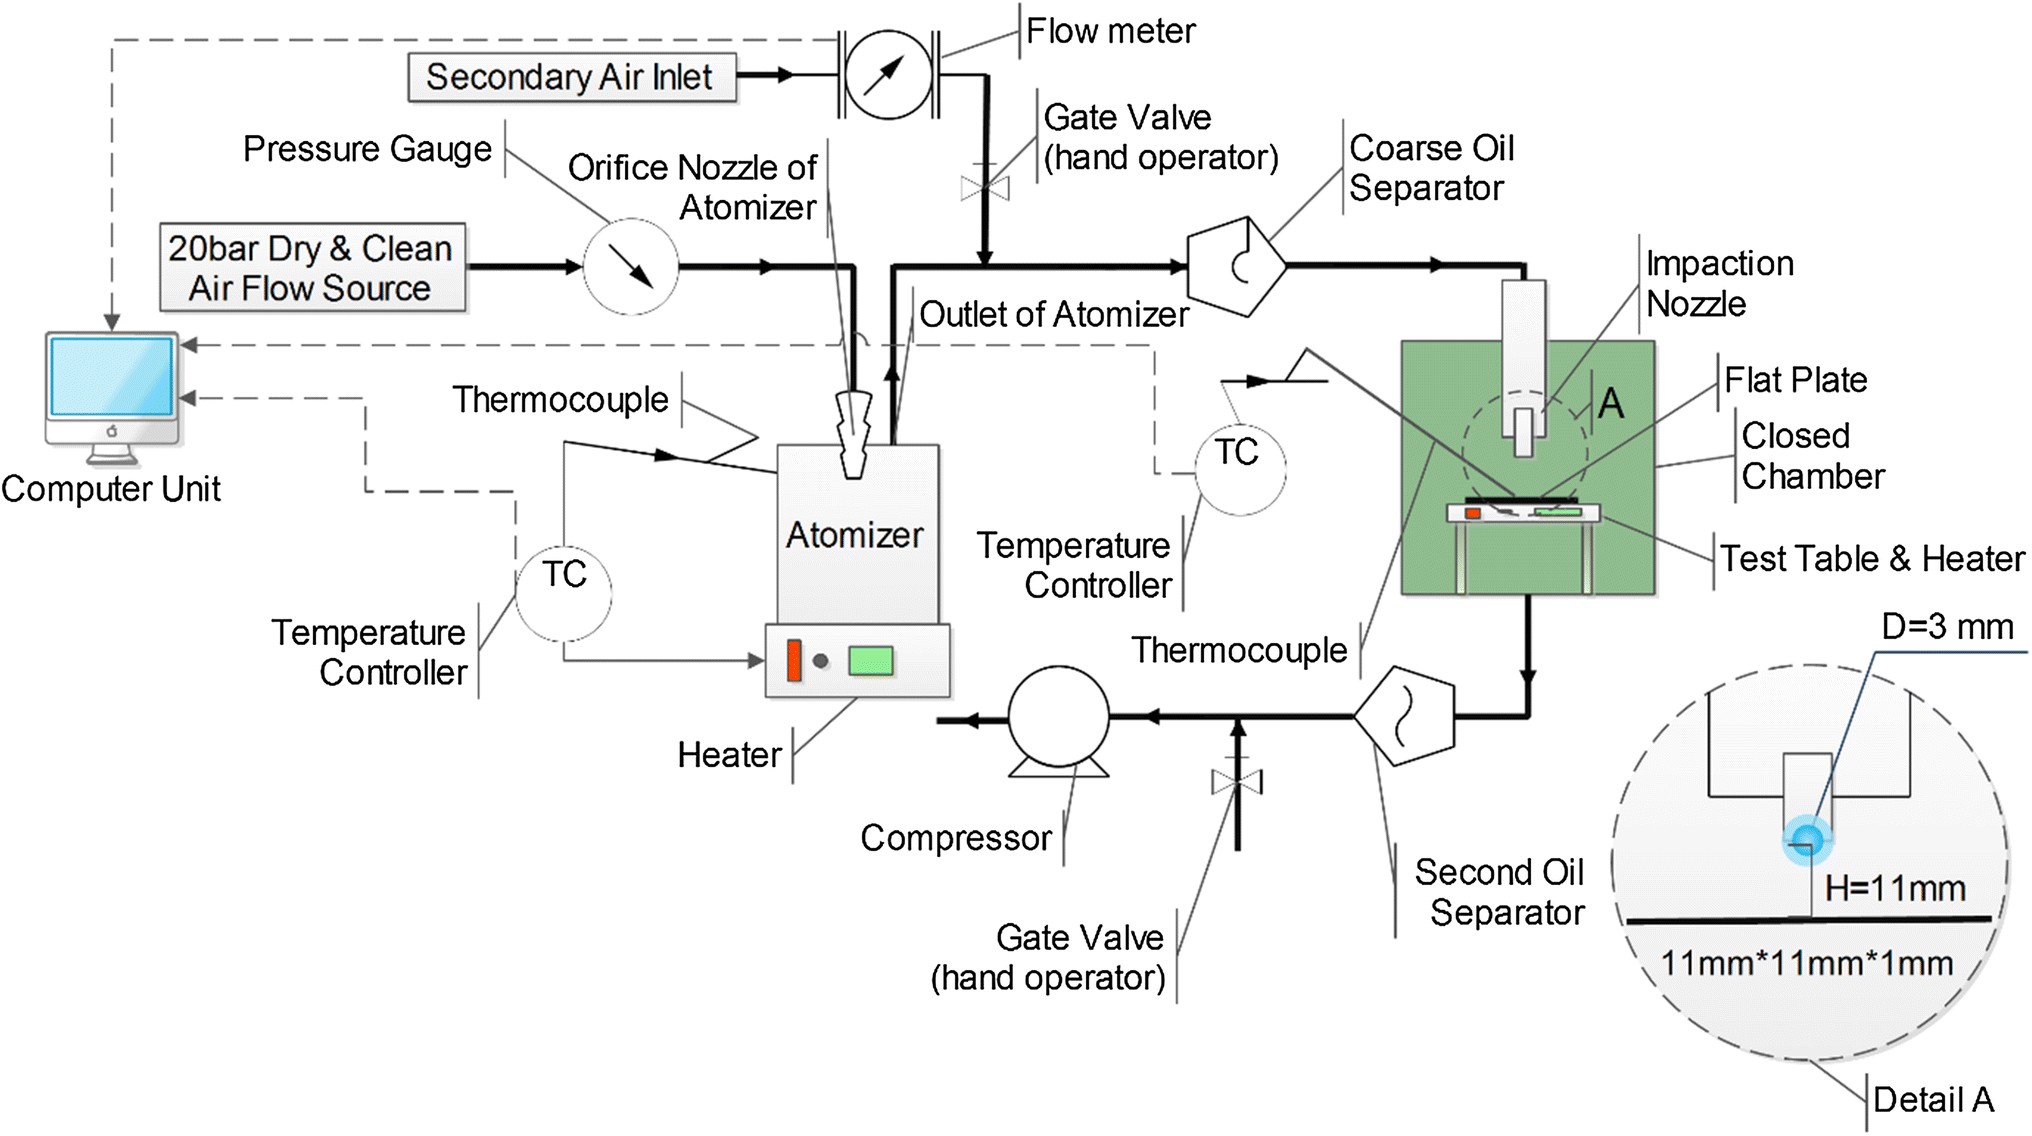 Engine Oil Flow Diagram Effect Of Surface Temperature On the Impaction and Deposition Of Of Engine Oil Flow Diagram